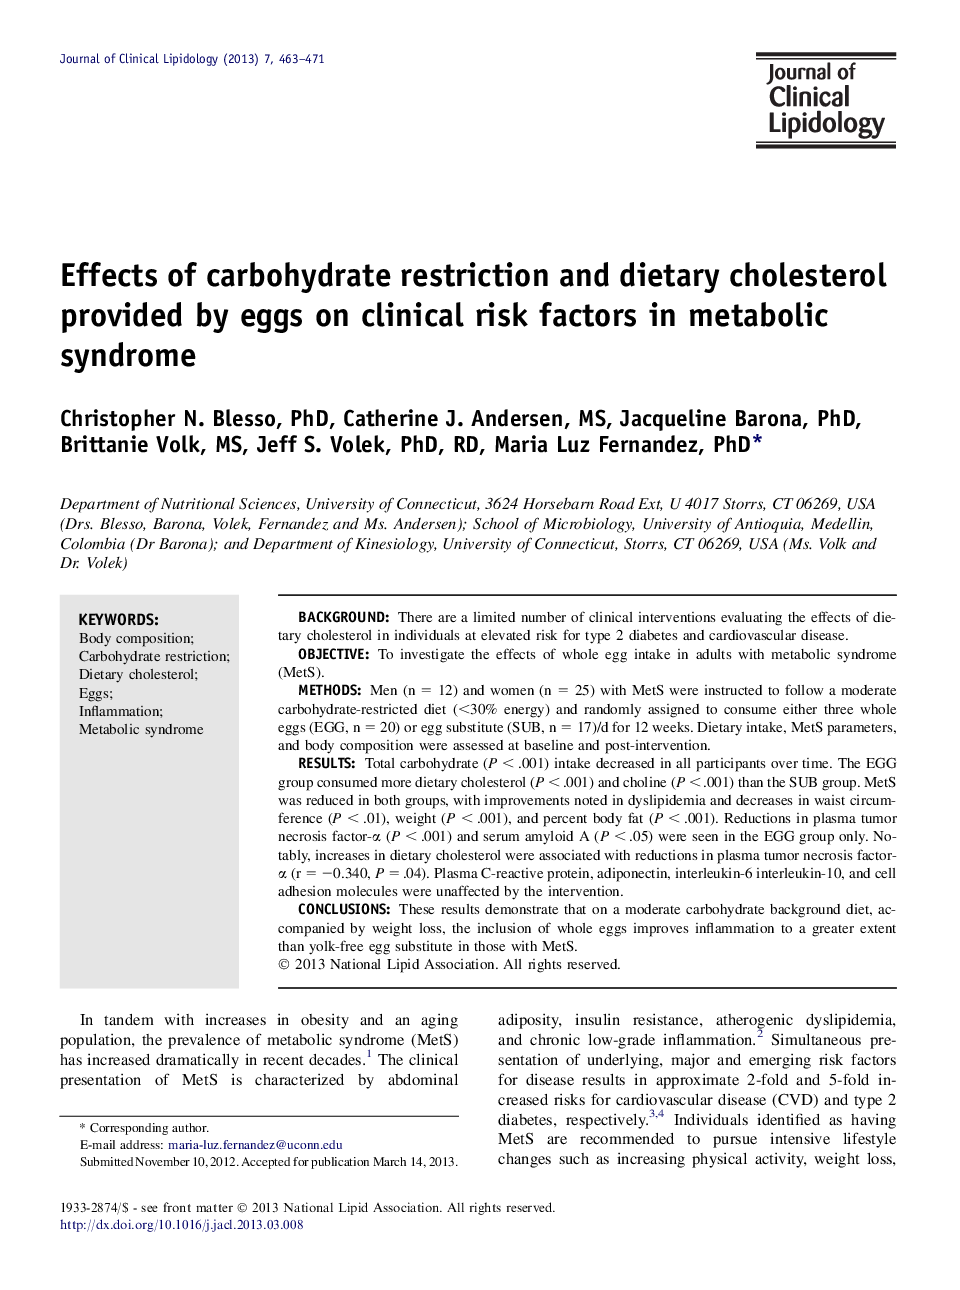 Effects of carbohydrate restriction and dietary cholesterol provided by eggs on clinical risk factors in metabolic syndrome